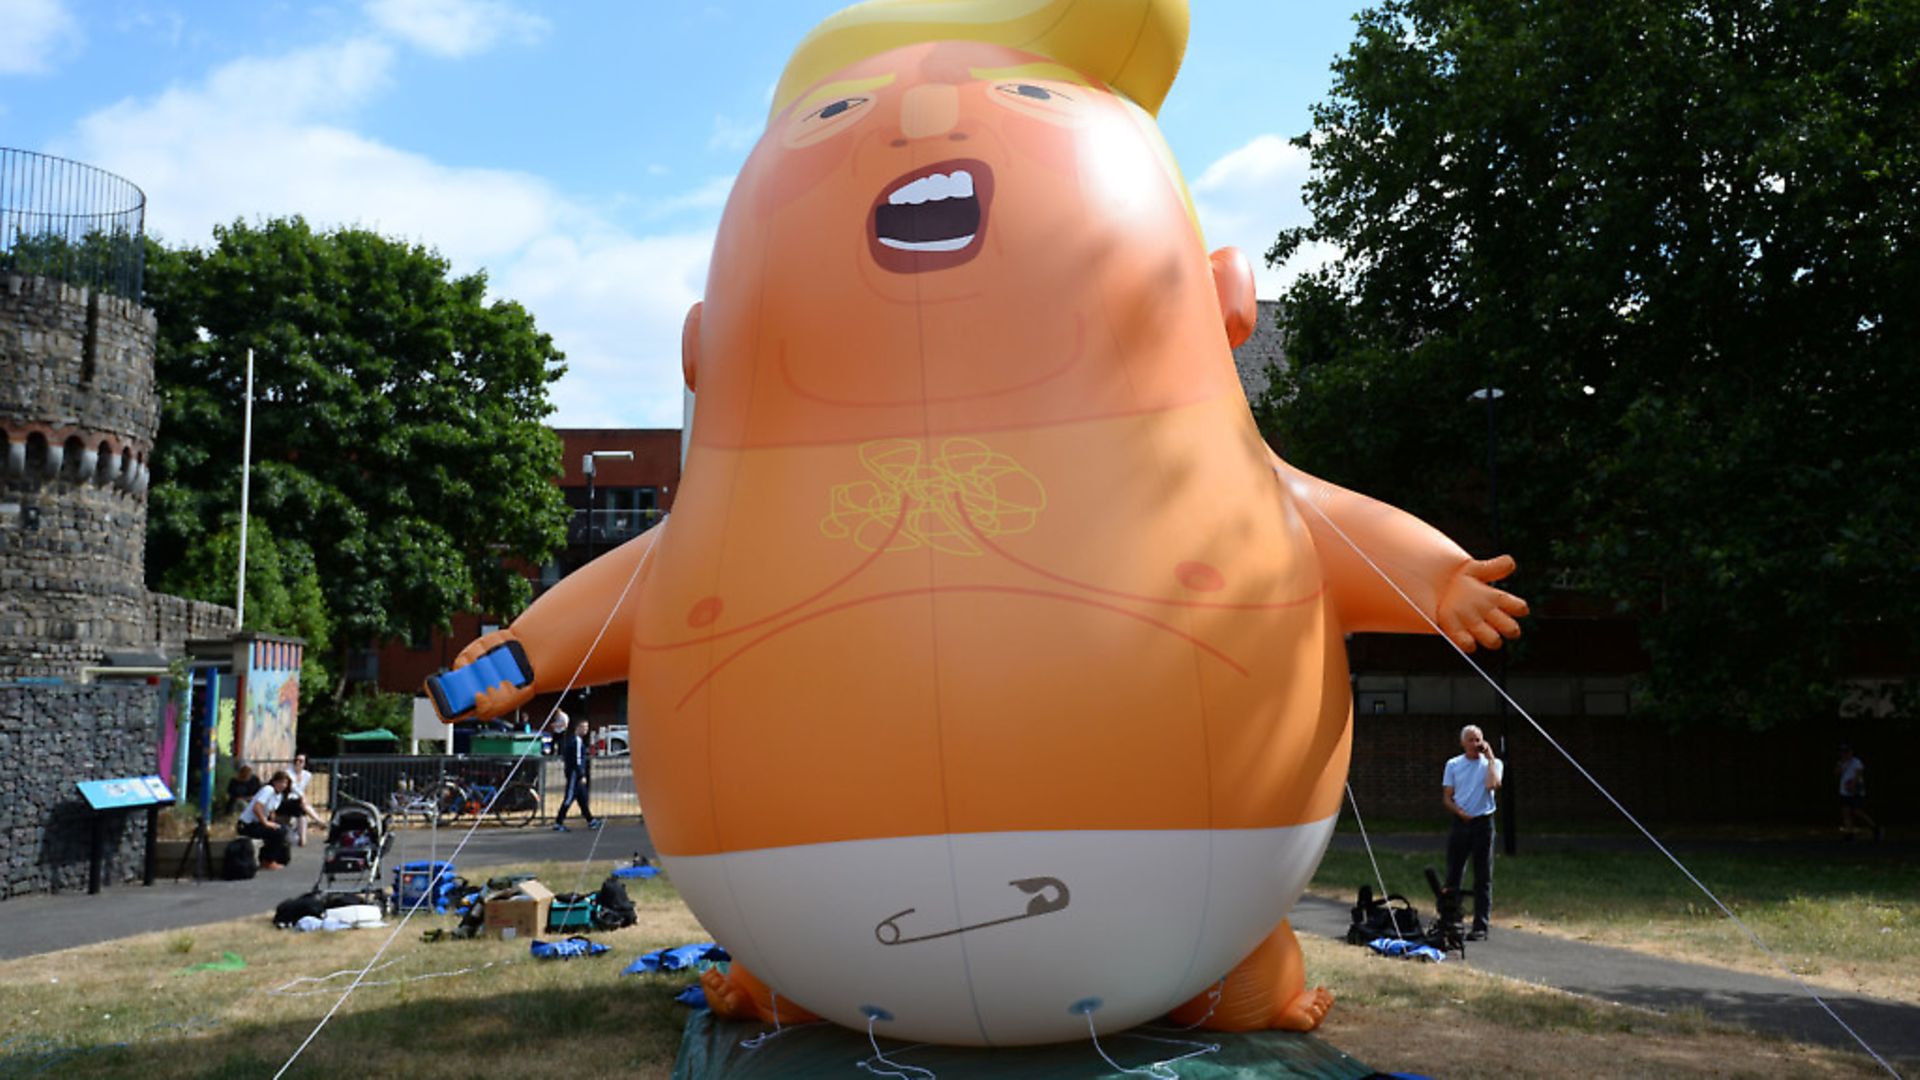 The Trump Baby Blimp was flown as the US president arrived in London. Photograph: Kirsty O'Connor/PA. - Credit: PA Wire/PA Images